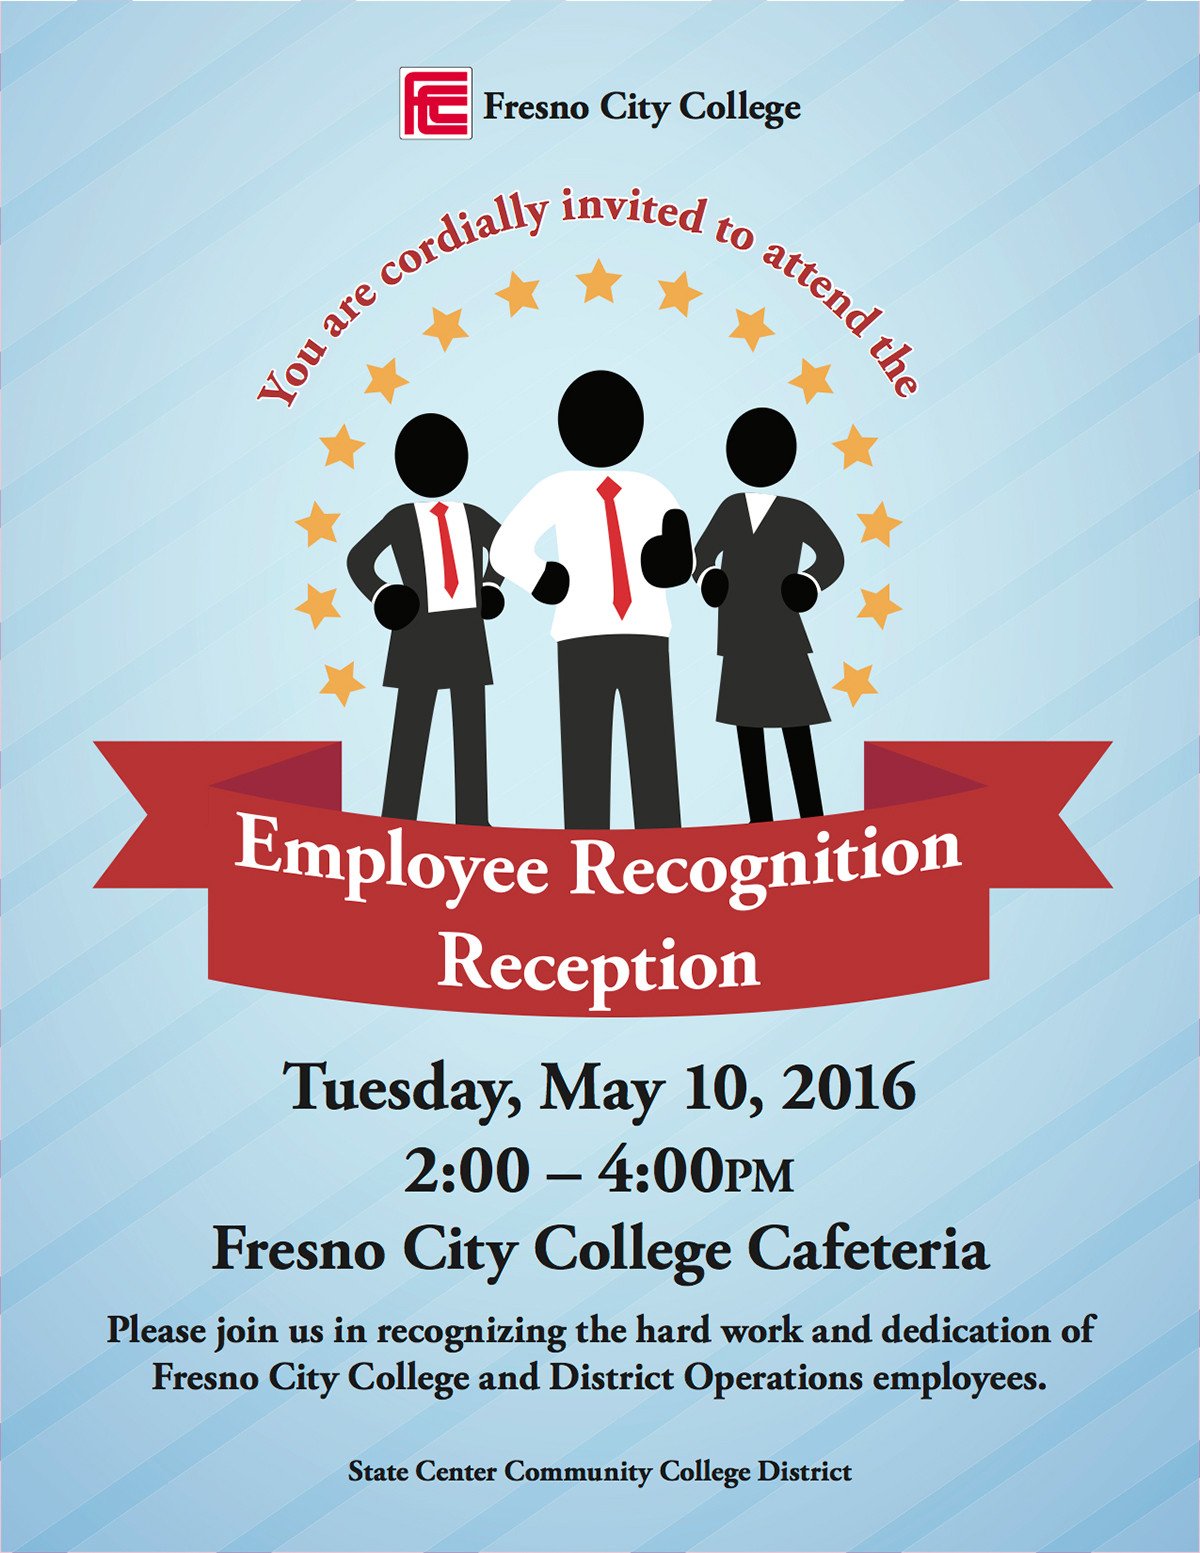 Employee Recognition Reception Flyer on Behance